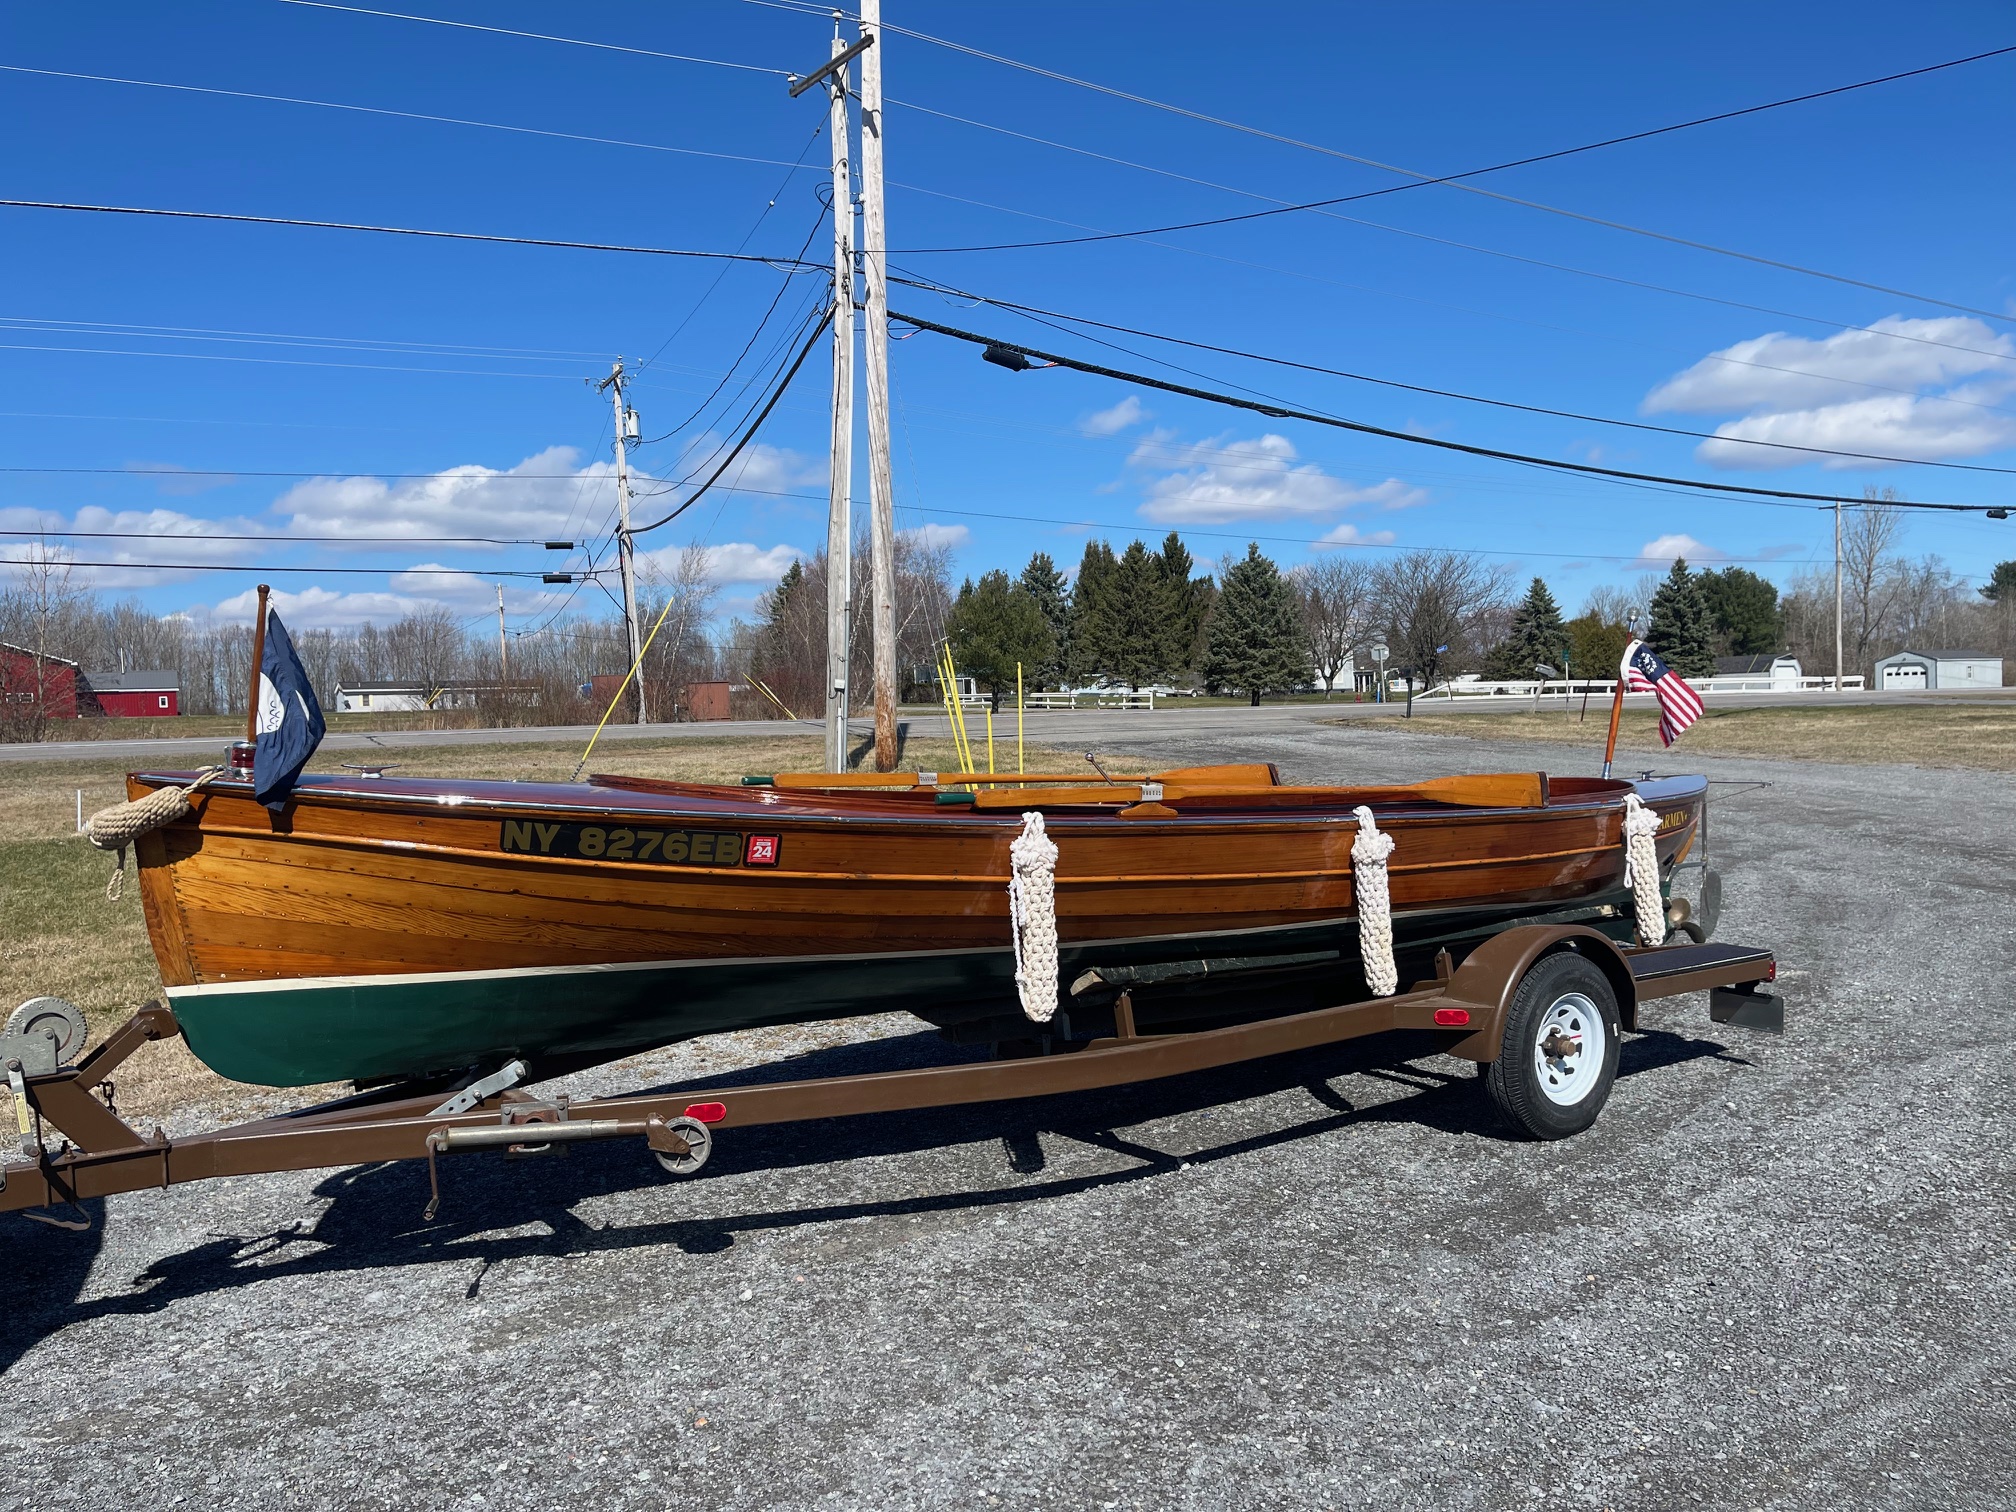 Antique boats between $10,000 and $25,000